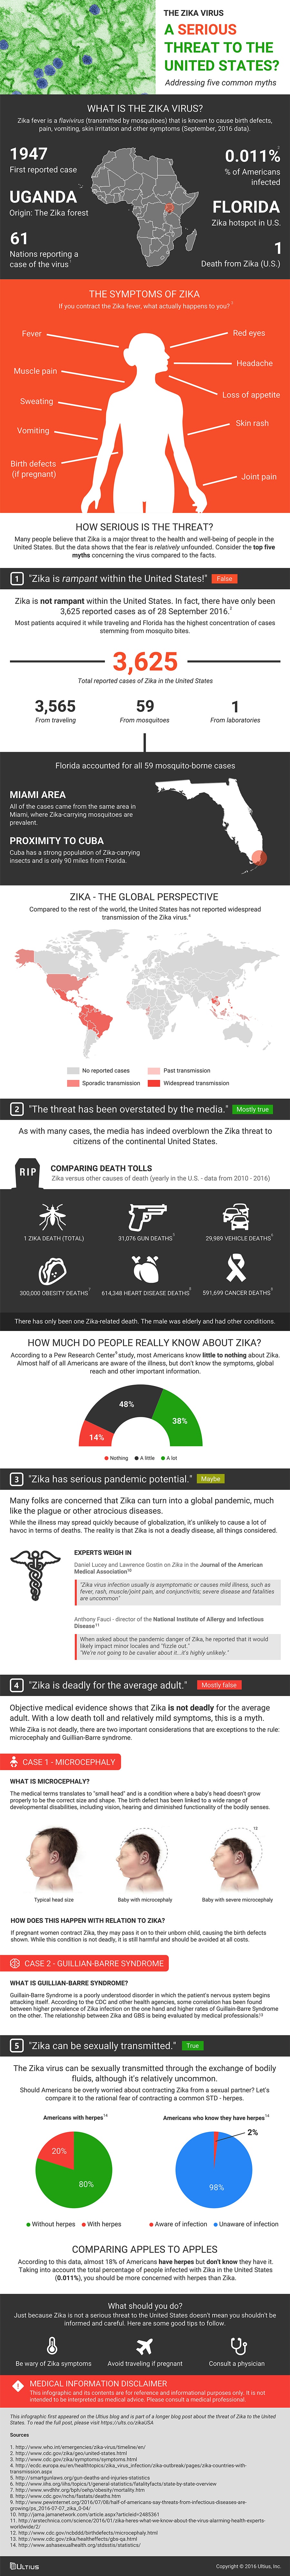 Is Zika a threat to the United States - Infographic